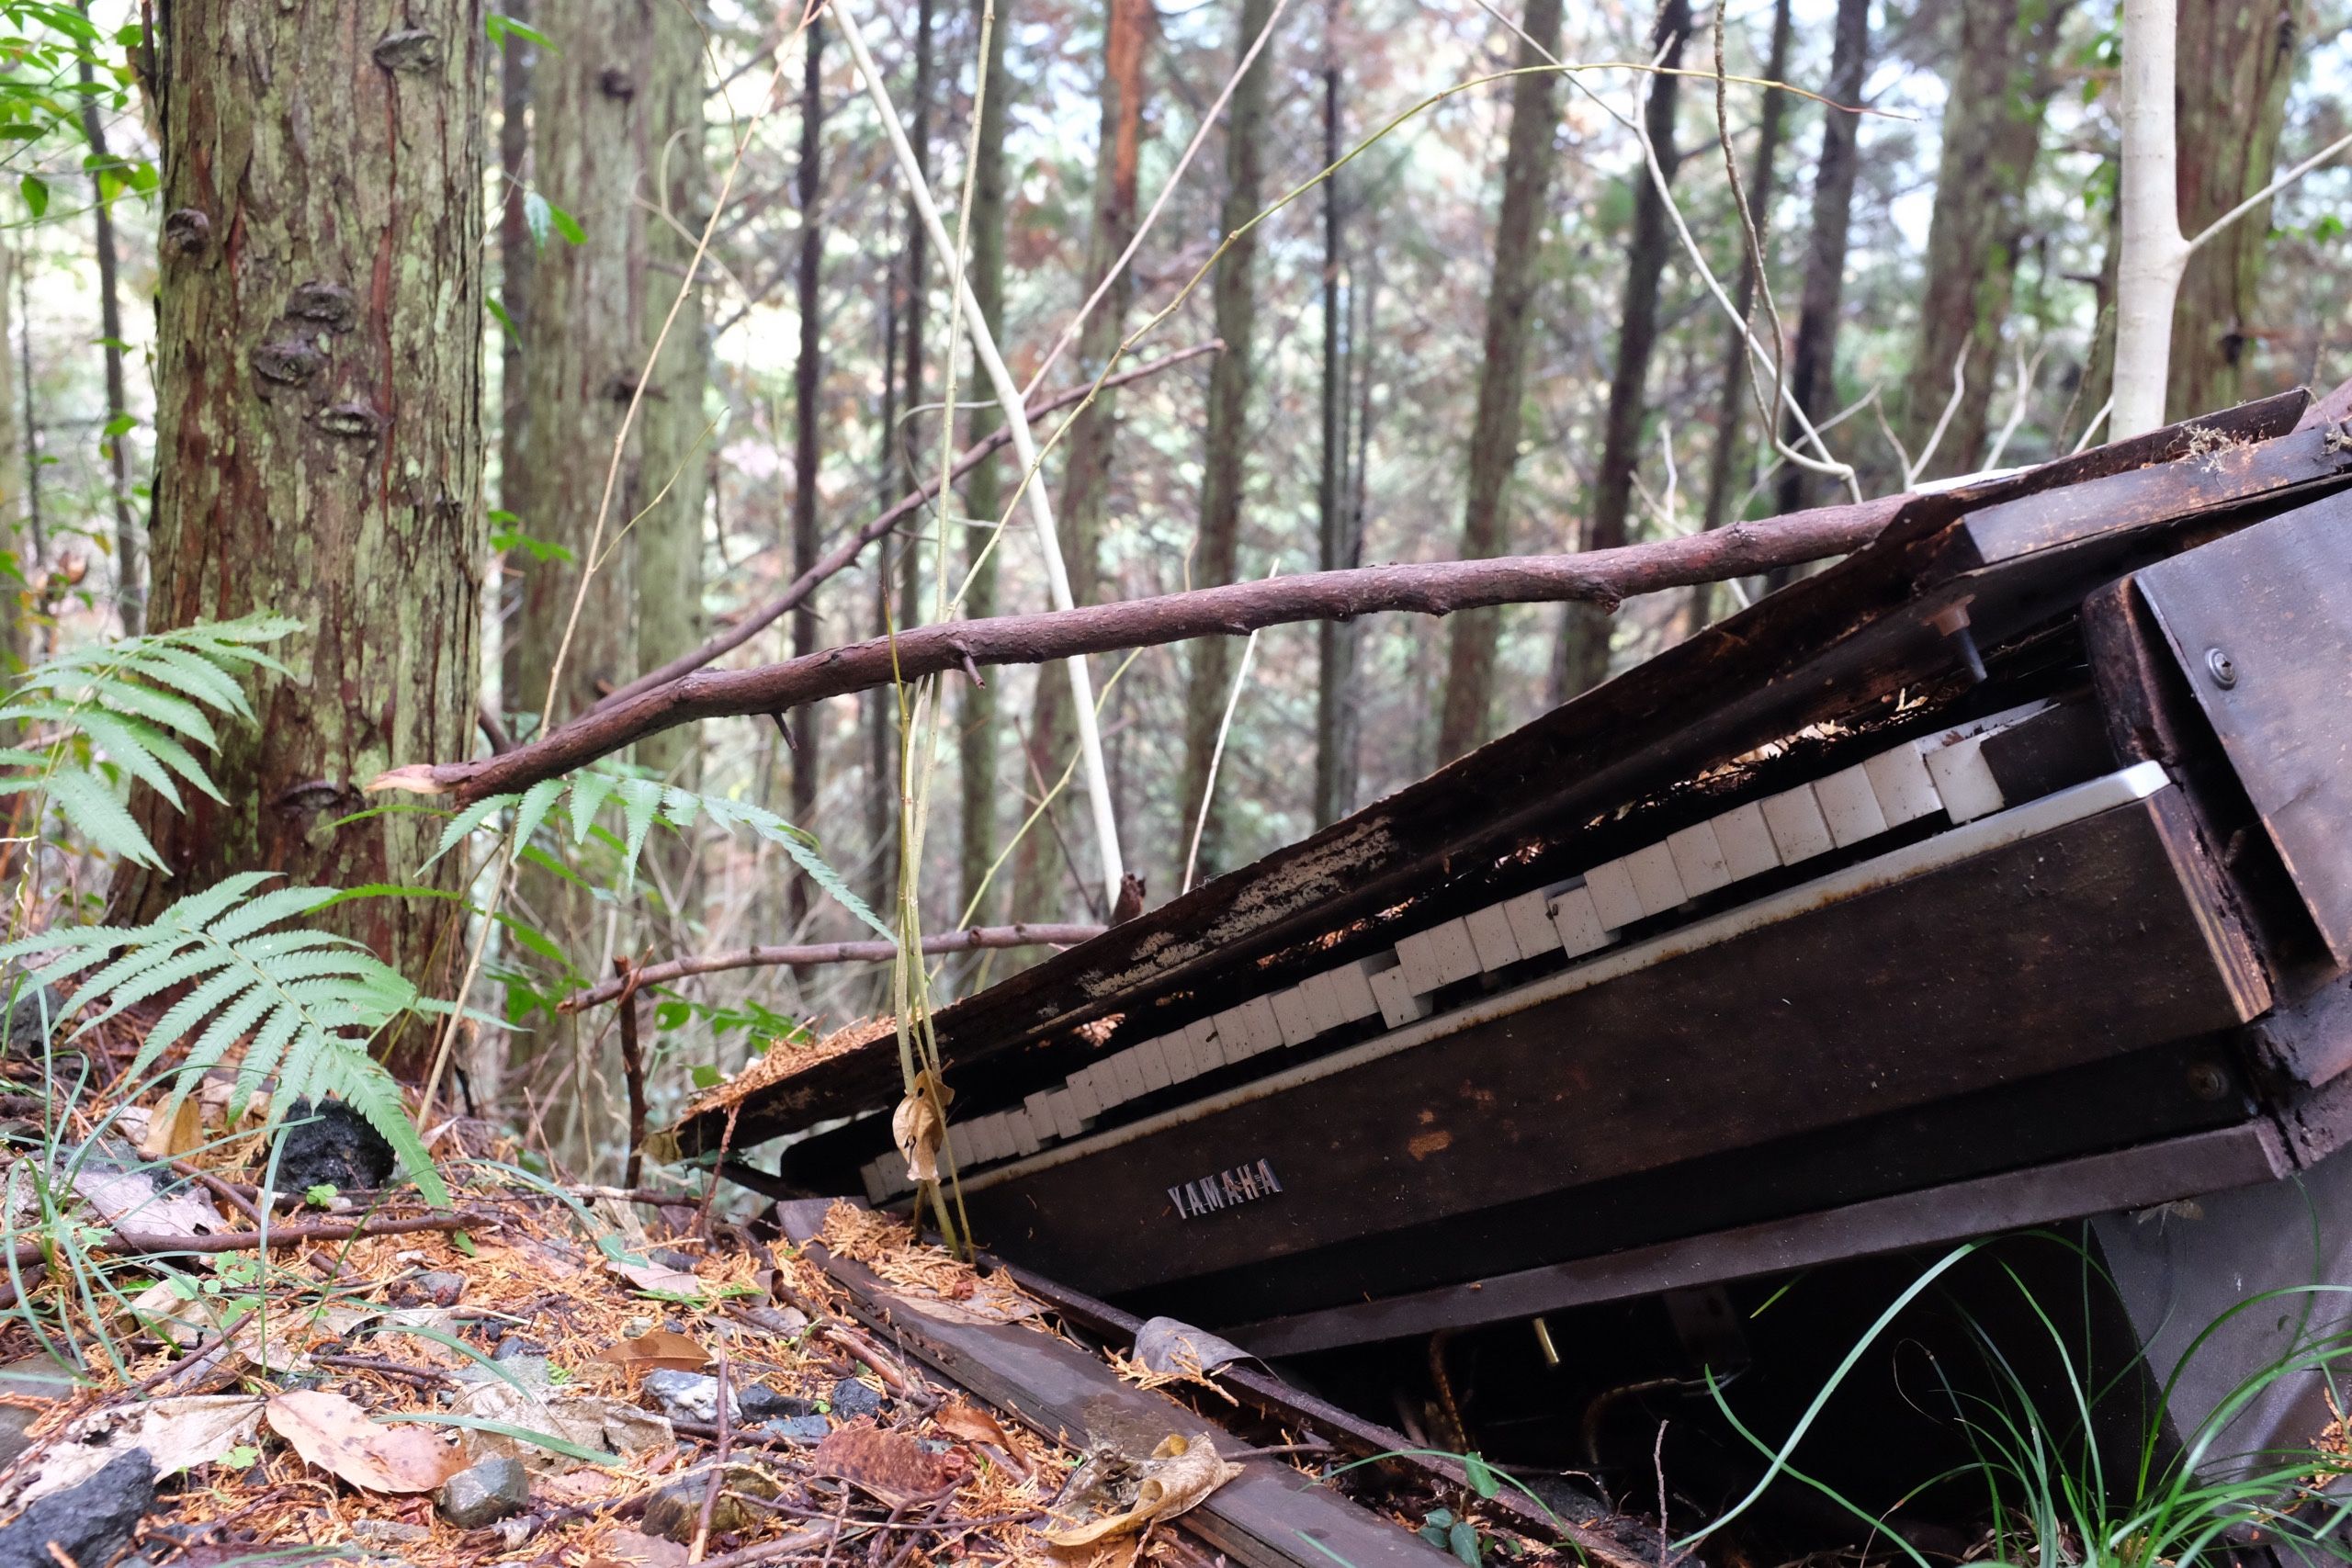 An abandoned Yamaha piano on a forest floor.